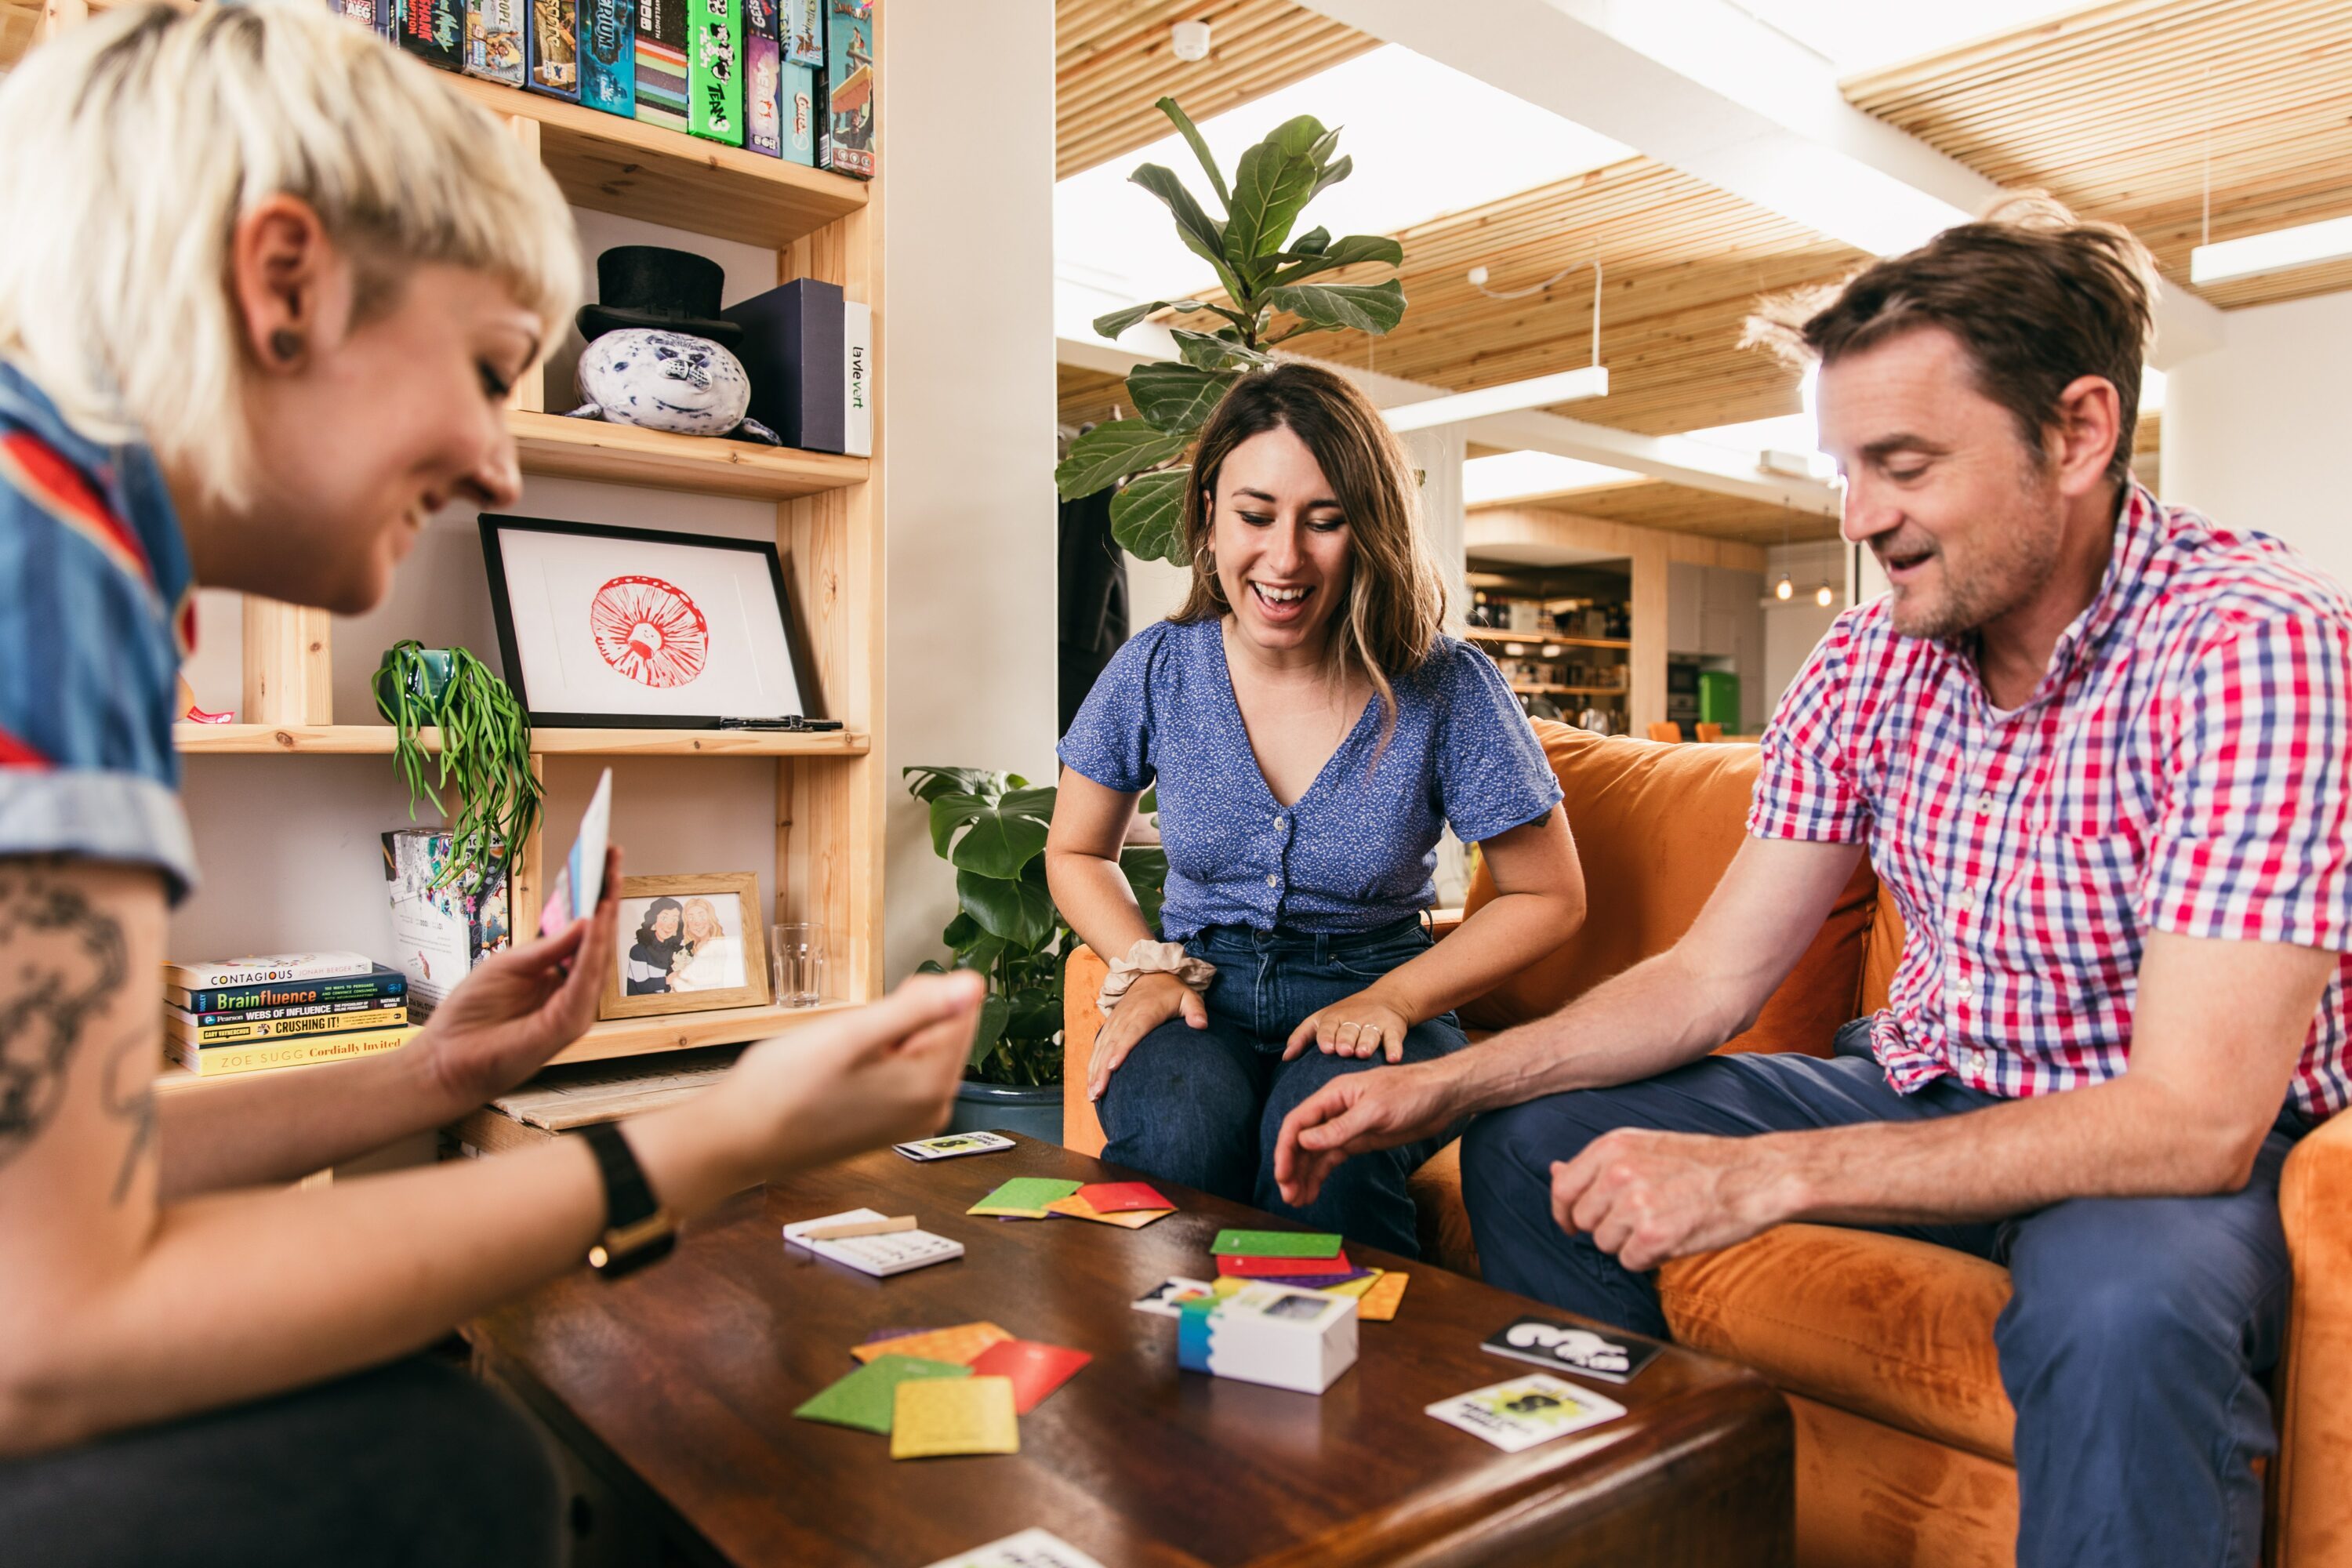 Three adults playing a board game together on a coffee table.